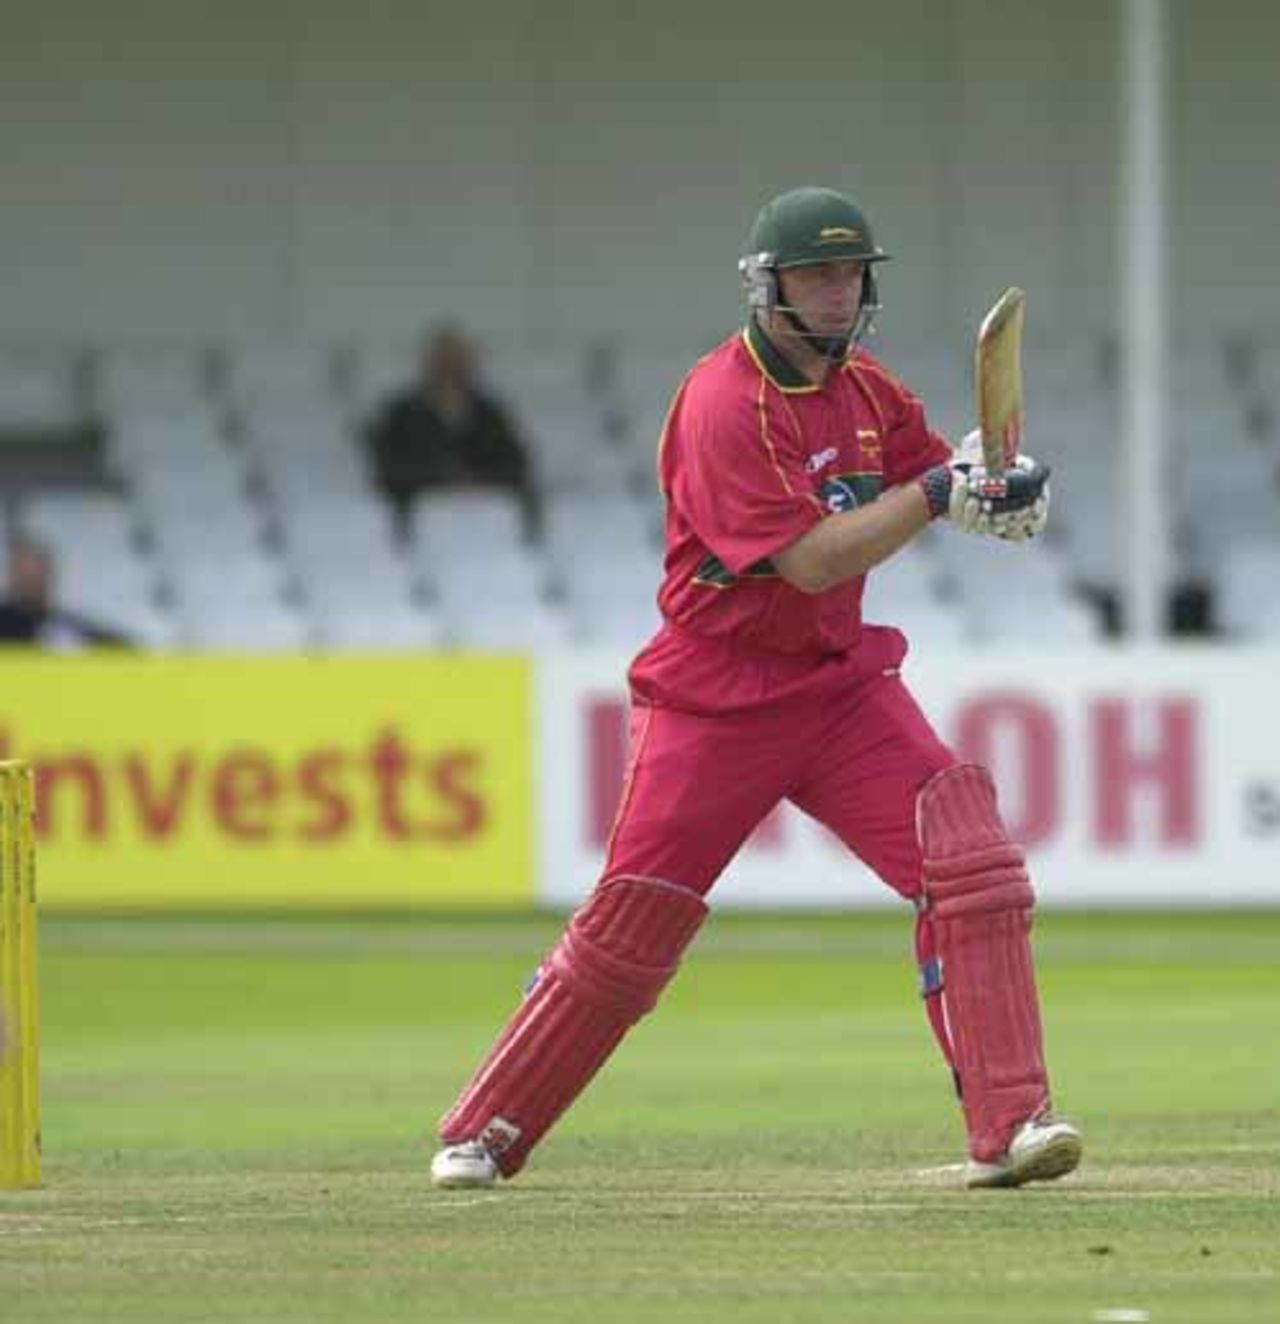 Dakin stands firm at his wicket after a delivery from Outlaw bowler Smith at Trent Bridge 16th September 2001